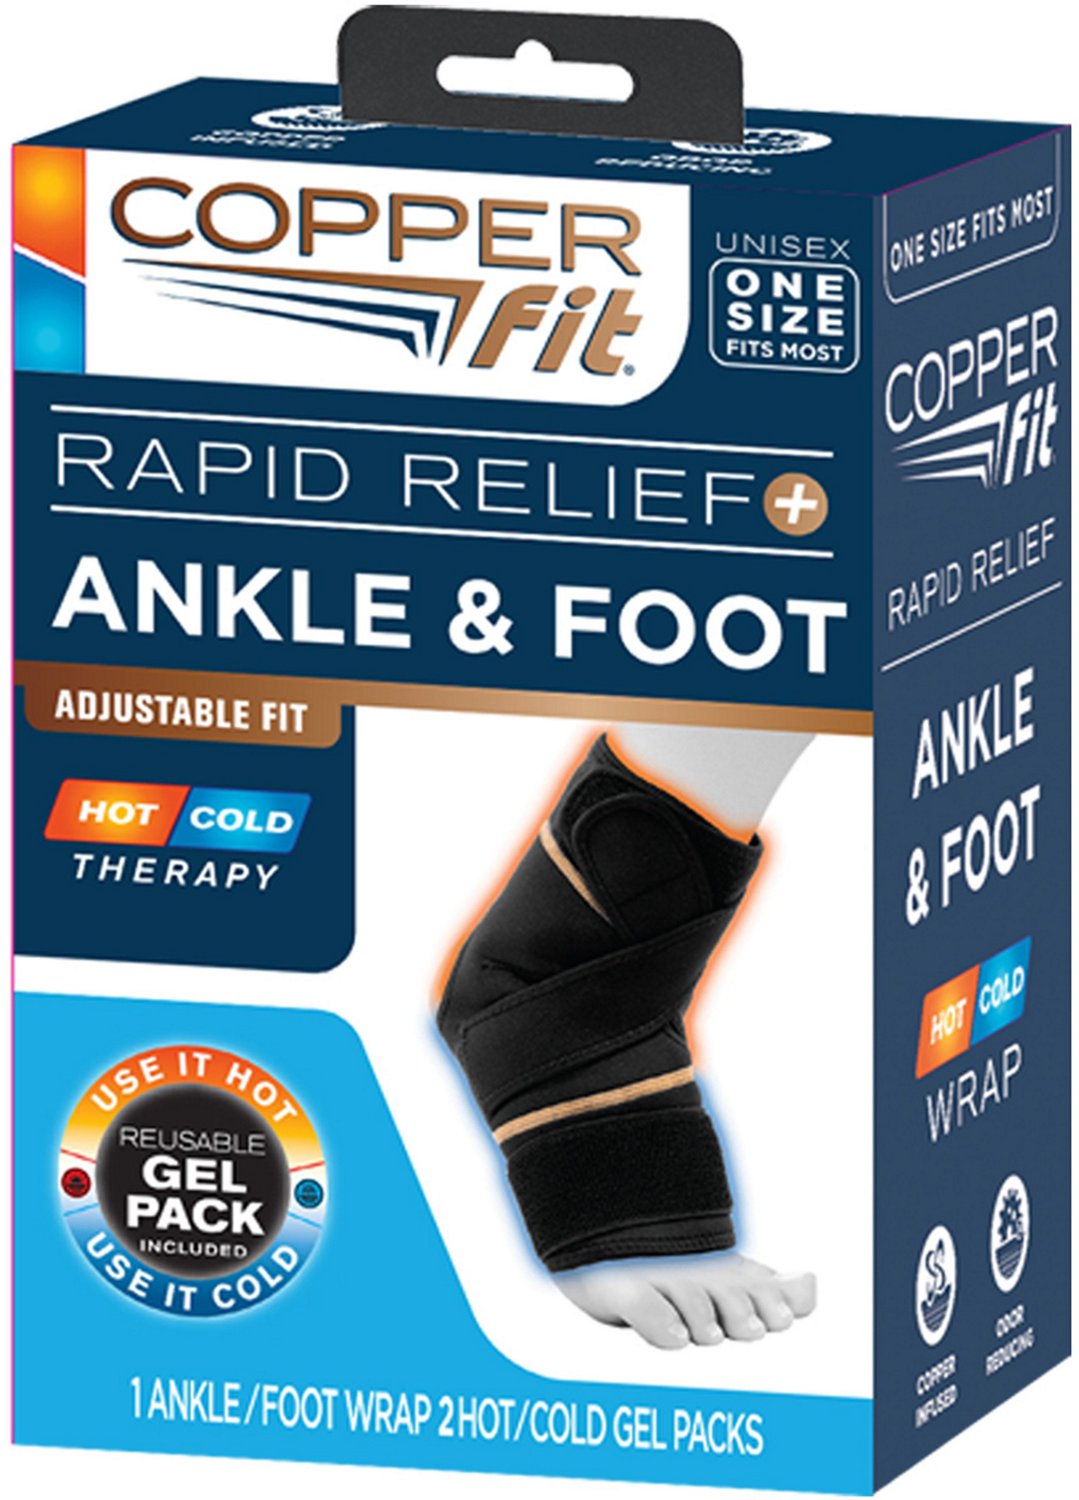 Foot & Ankle - Copper Fit